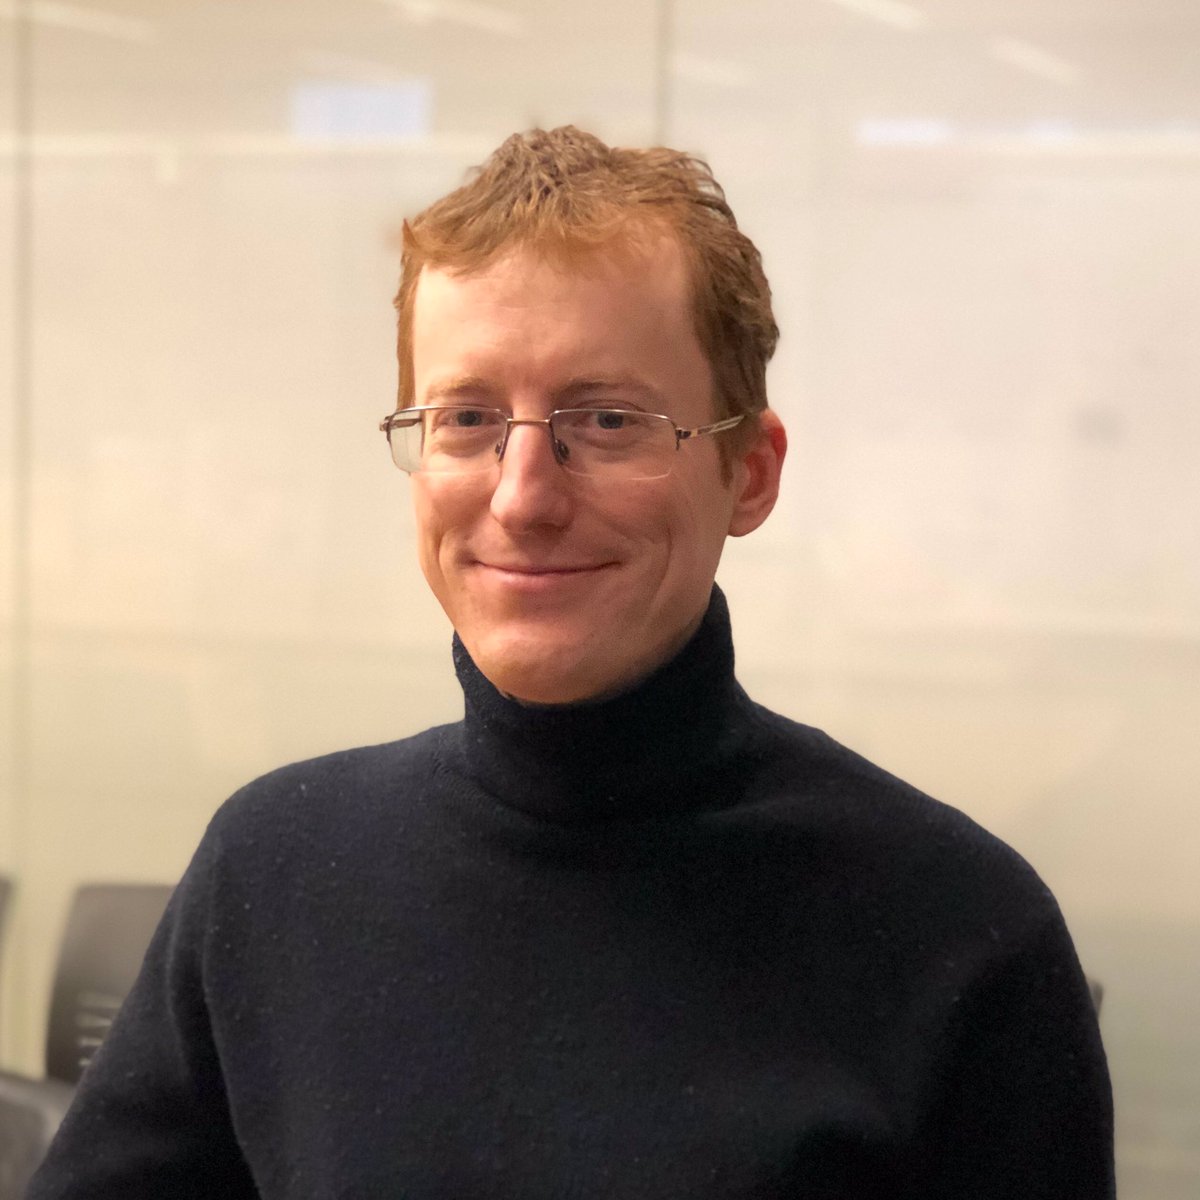 Congrats to our postdoc, Gabor Egervari, on two recent fellowships – Alzheimer’s Association Research Fellowship and the Brody Family Medical Trust Fellowship!